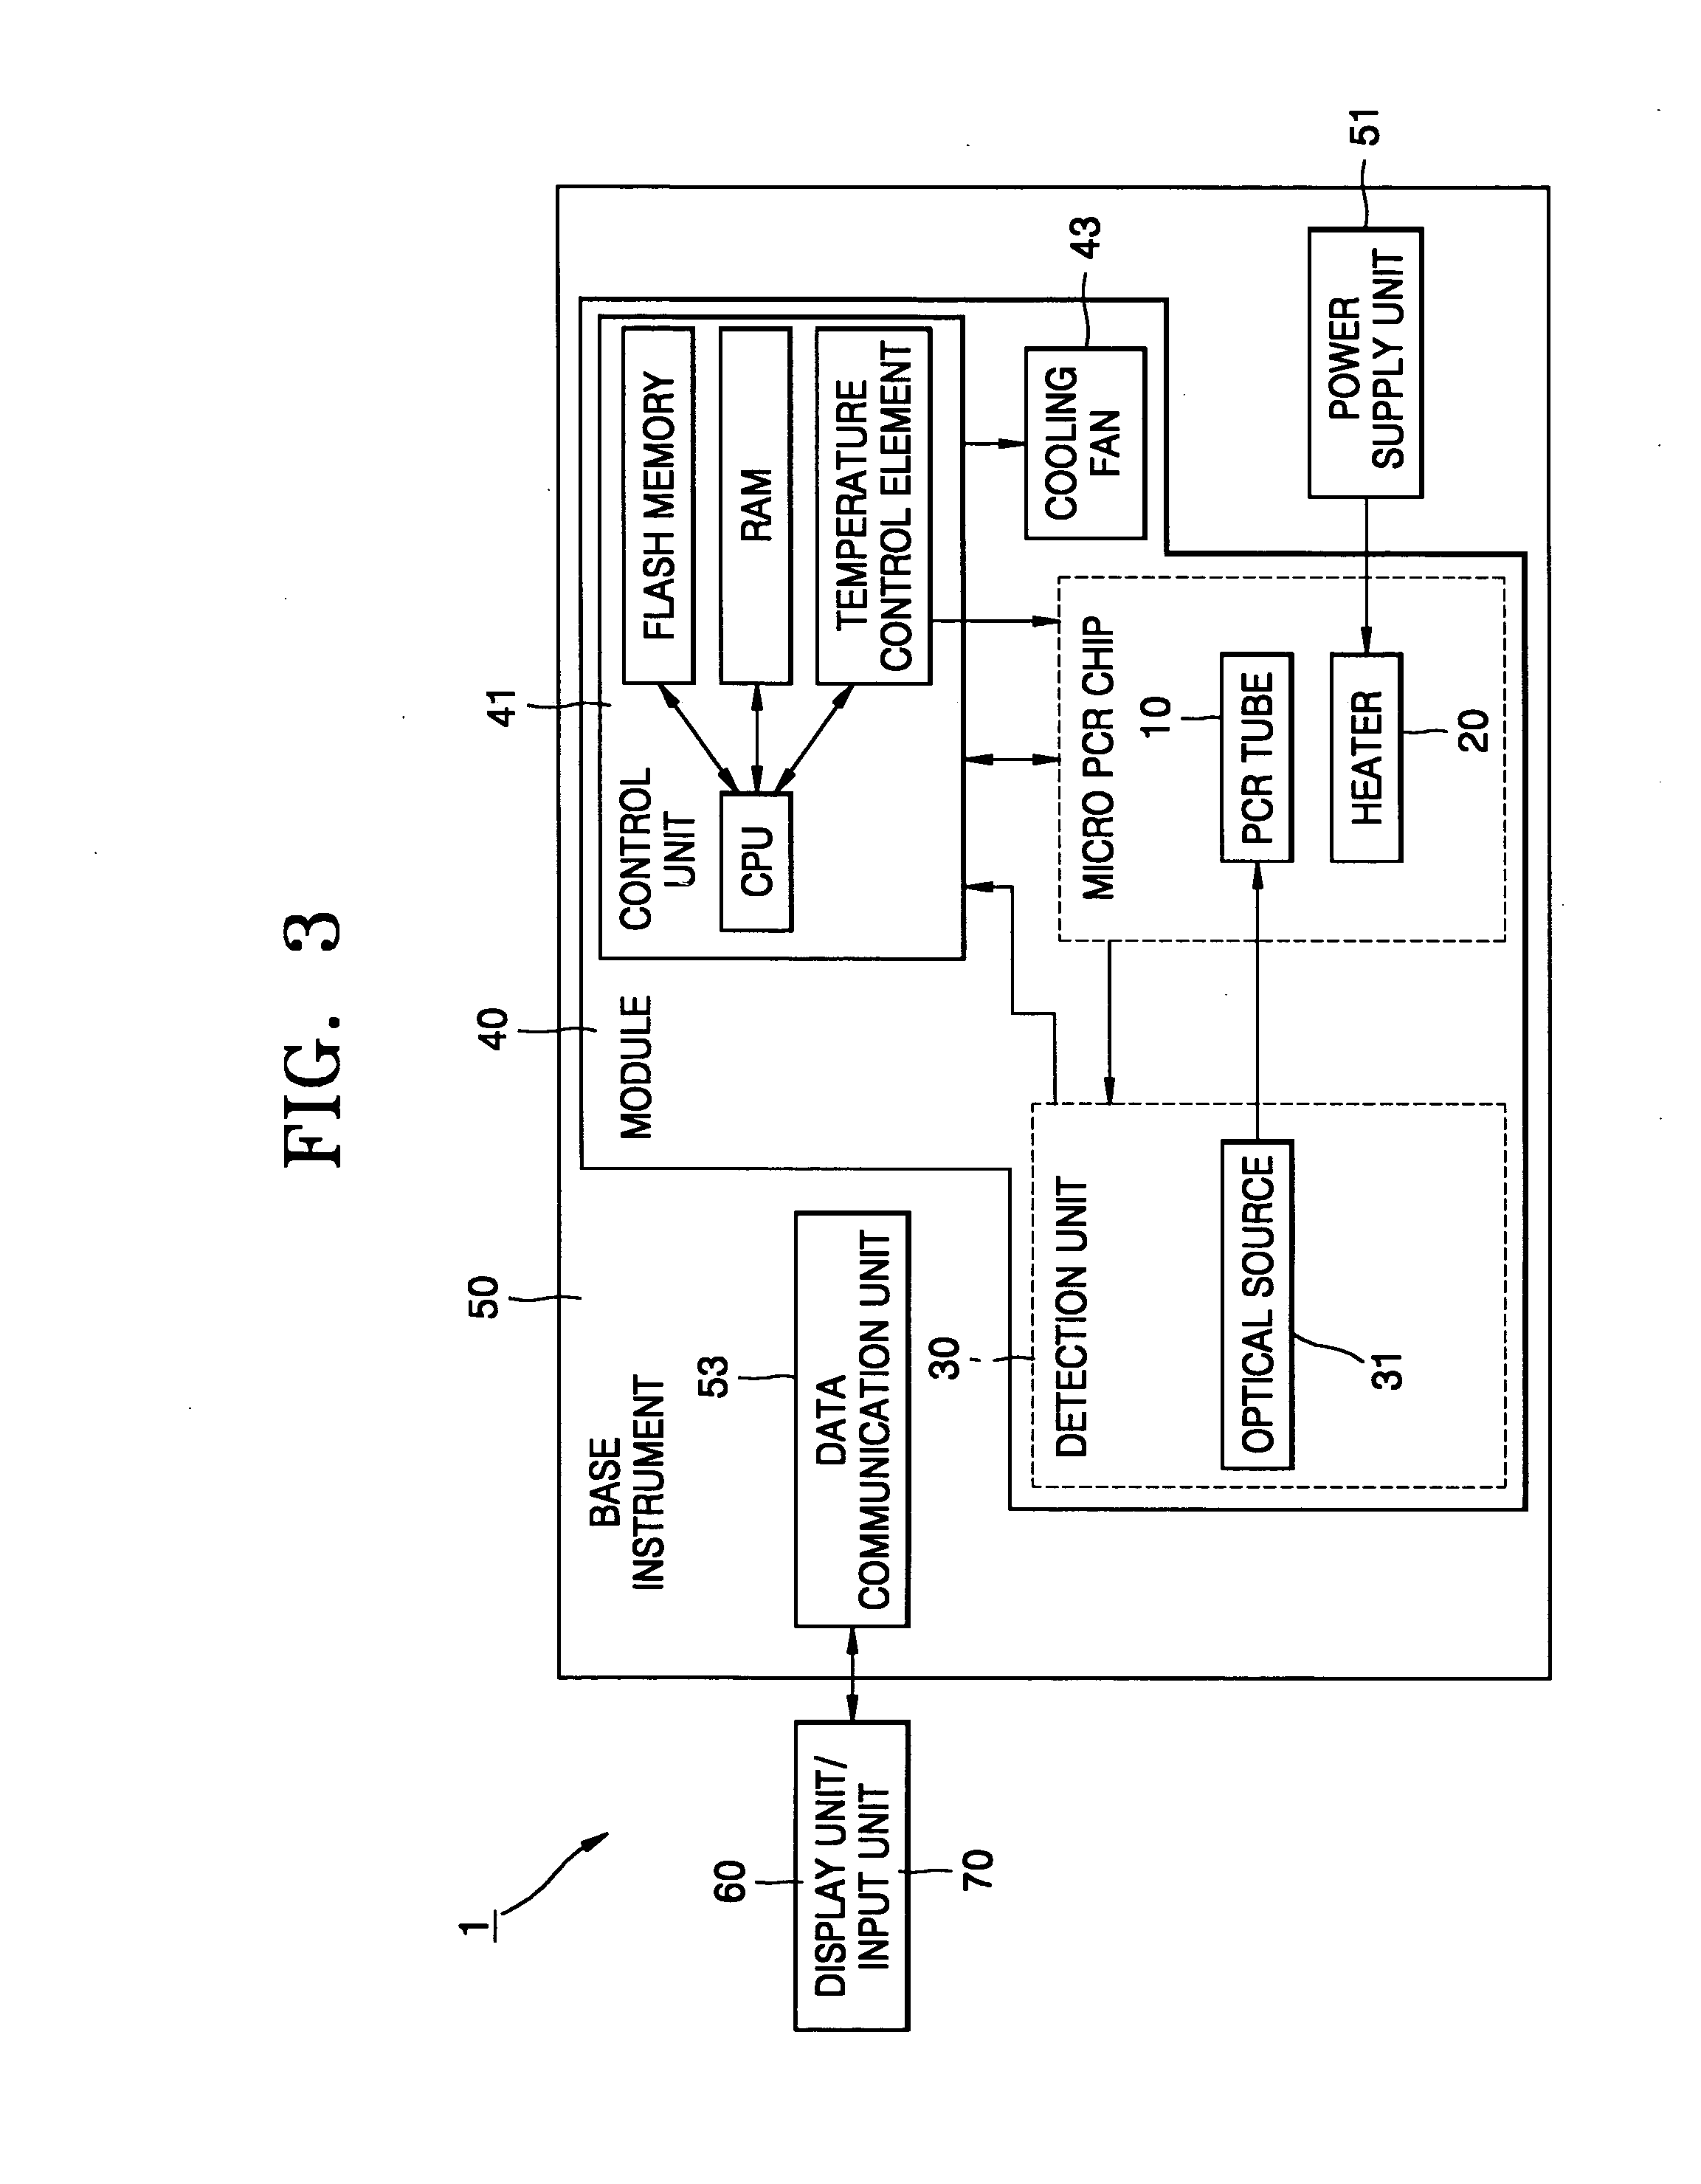 Real-time PCR monitoring apparatus and method